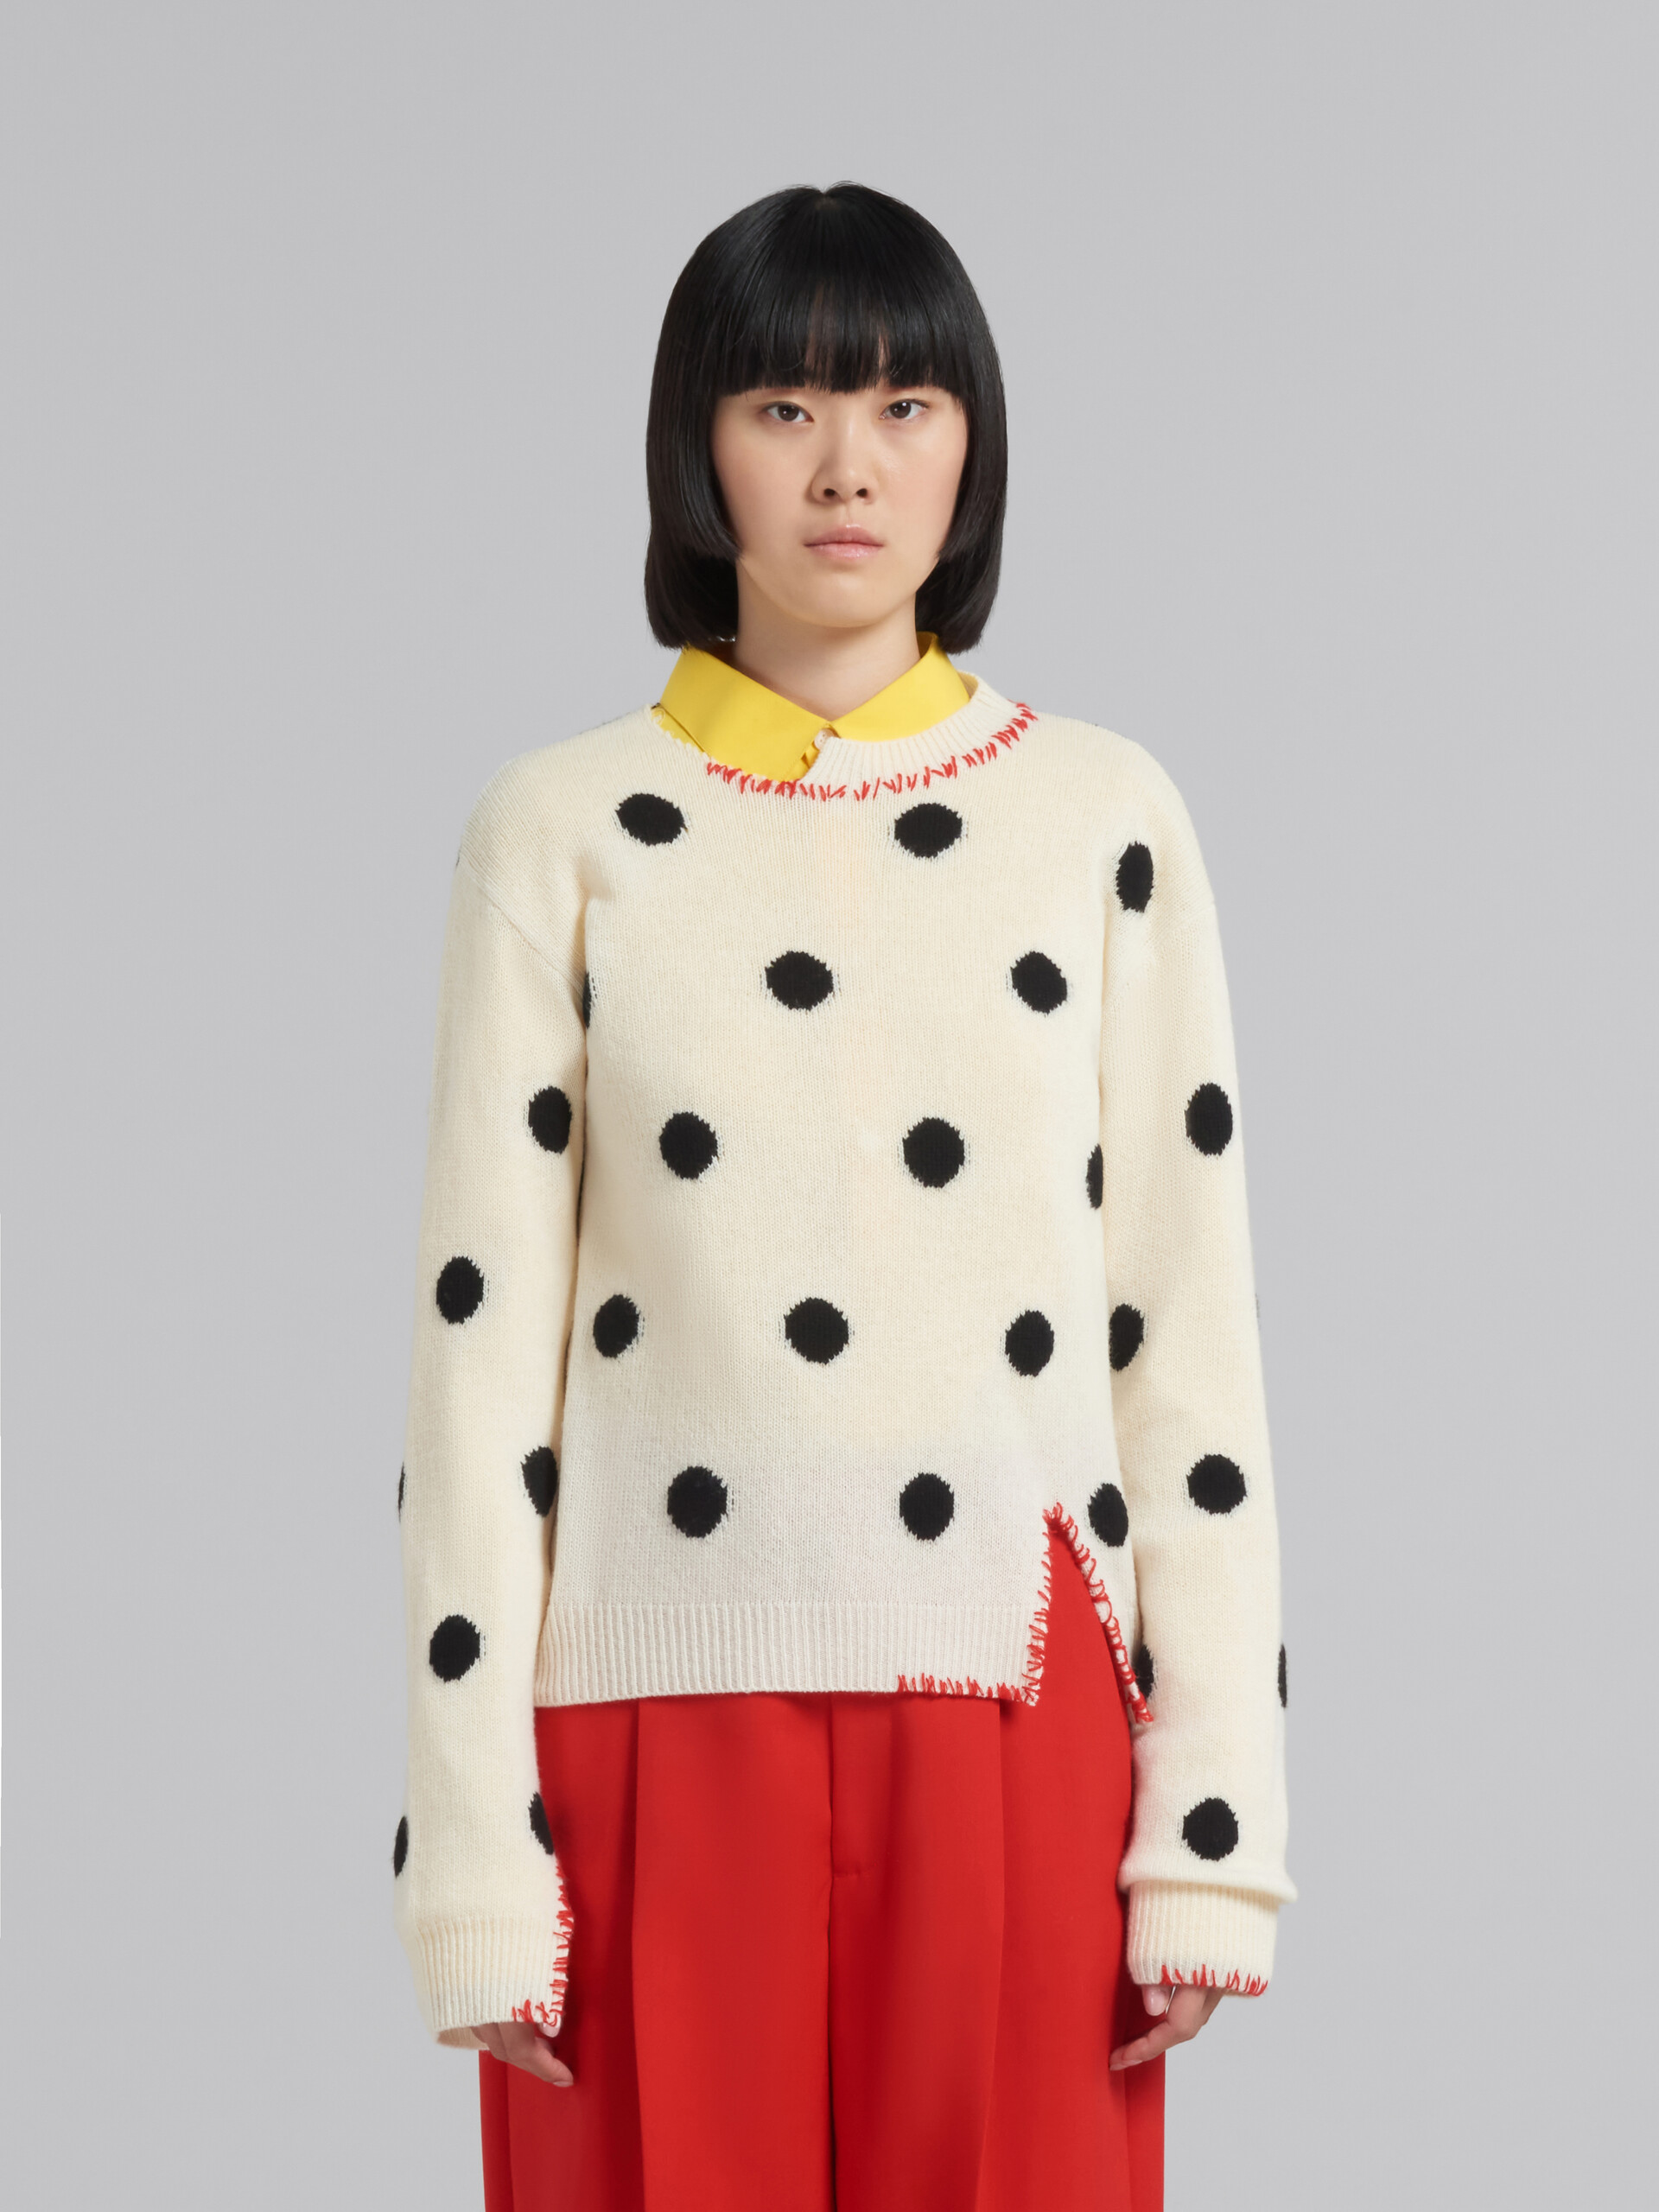 White wool jumper with polka dots - Pullovers - Image 2